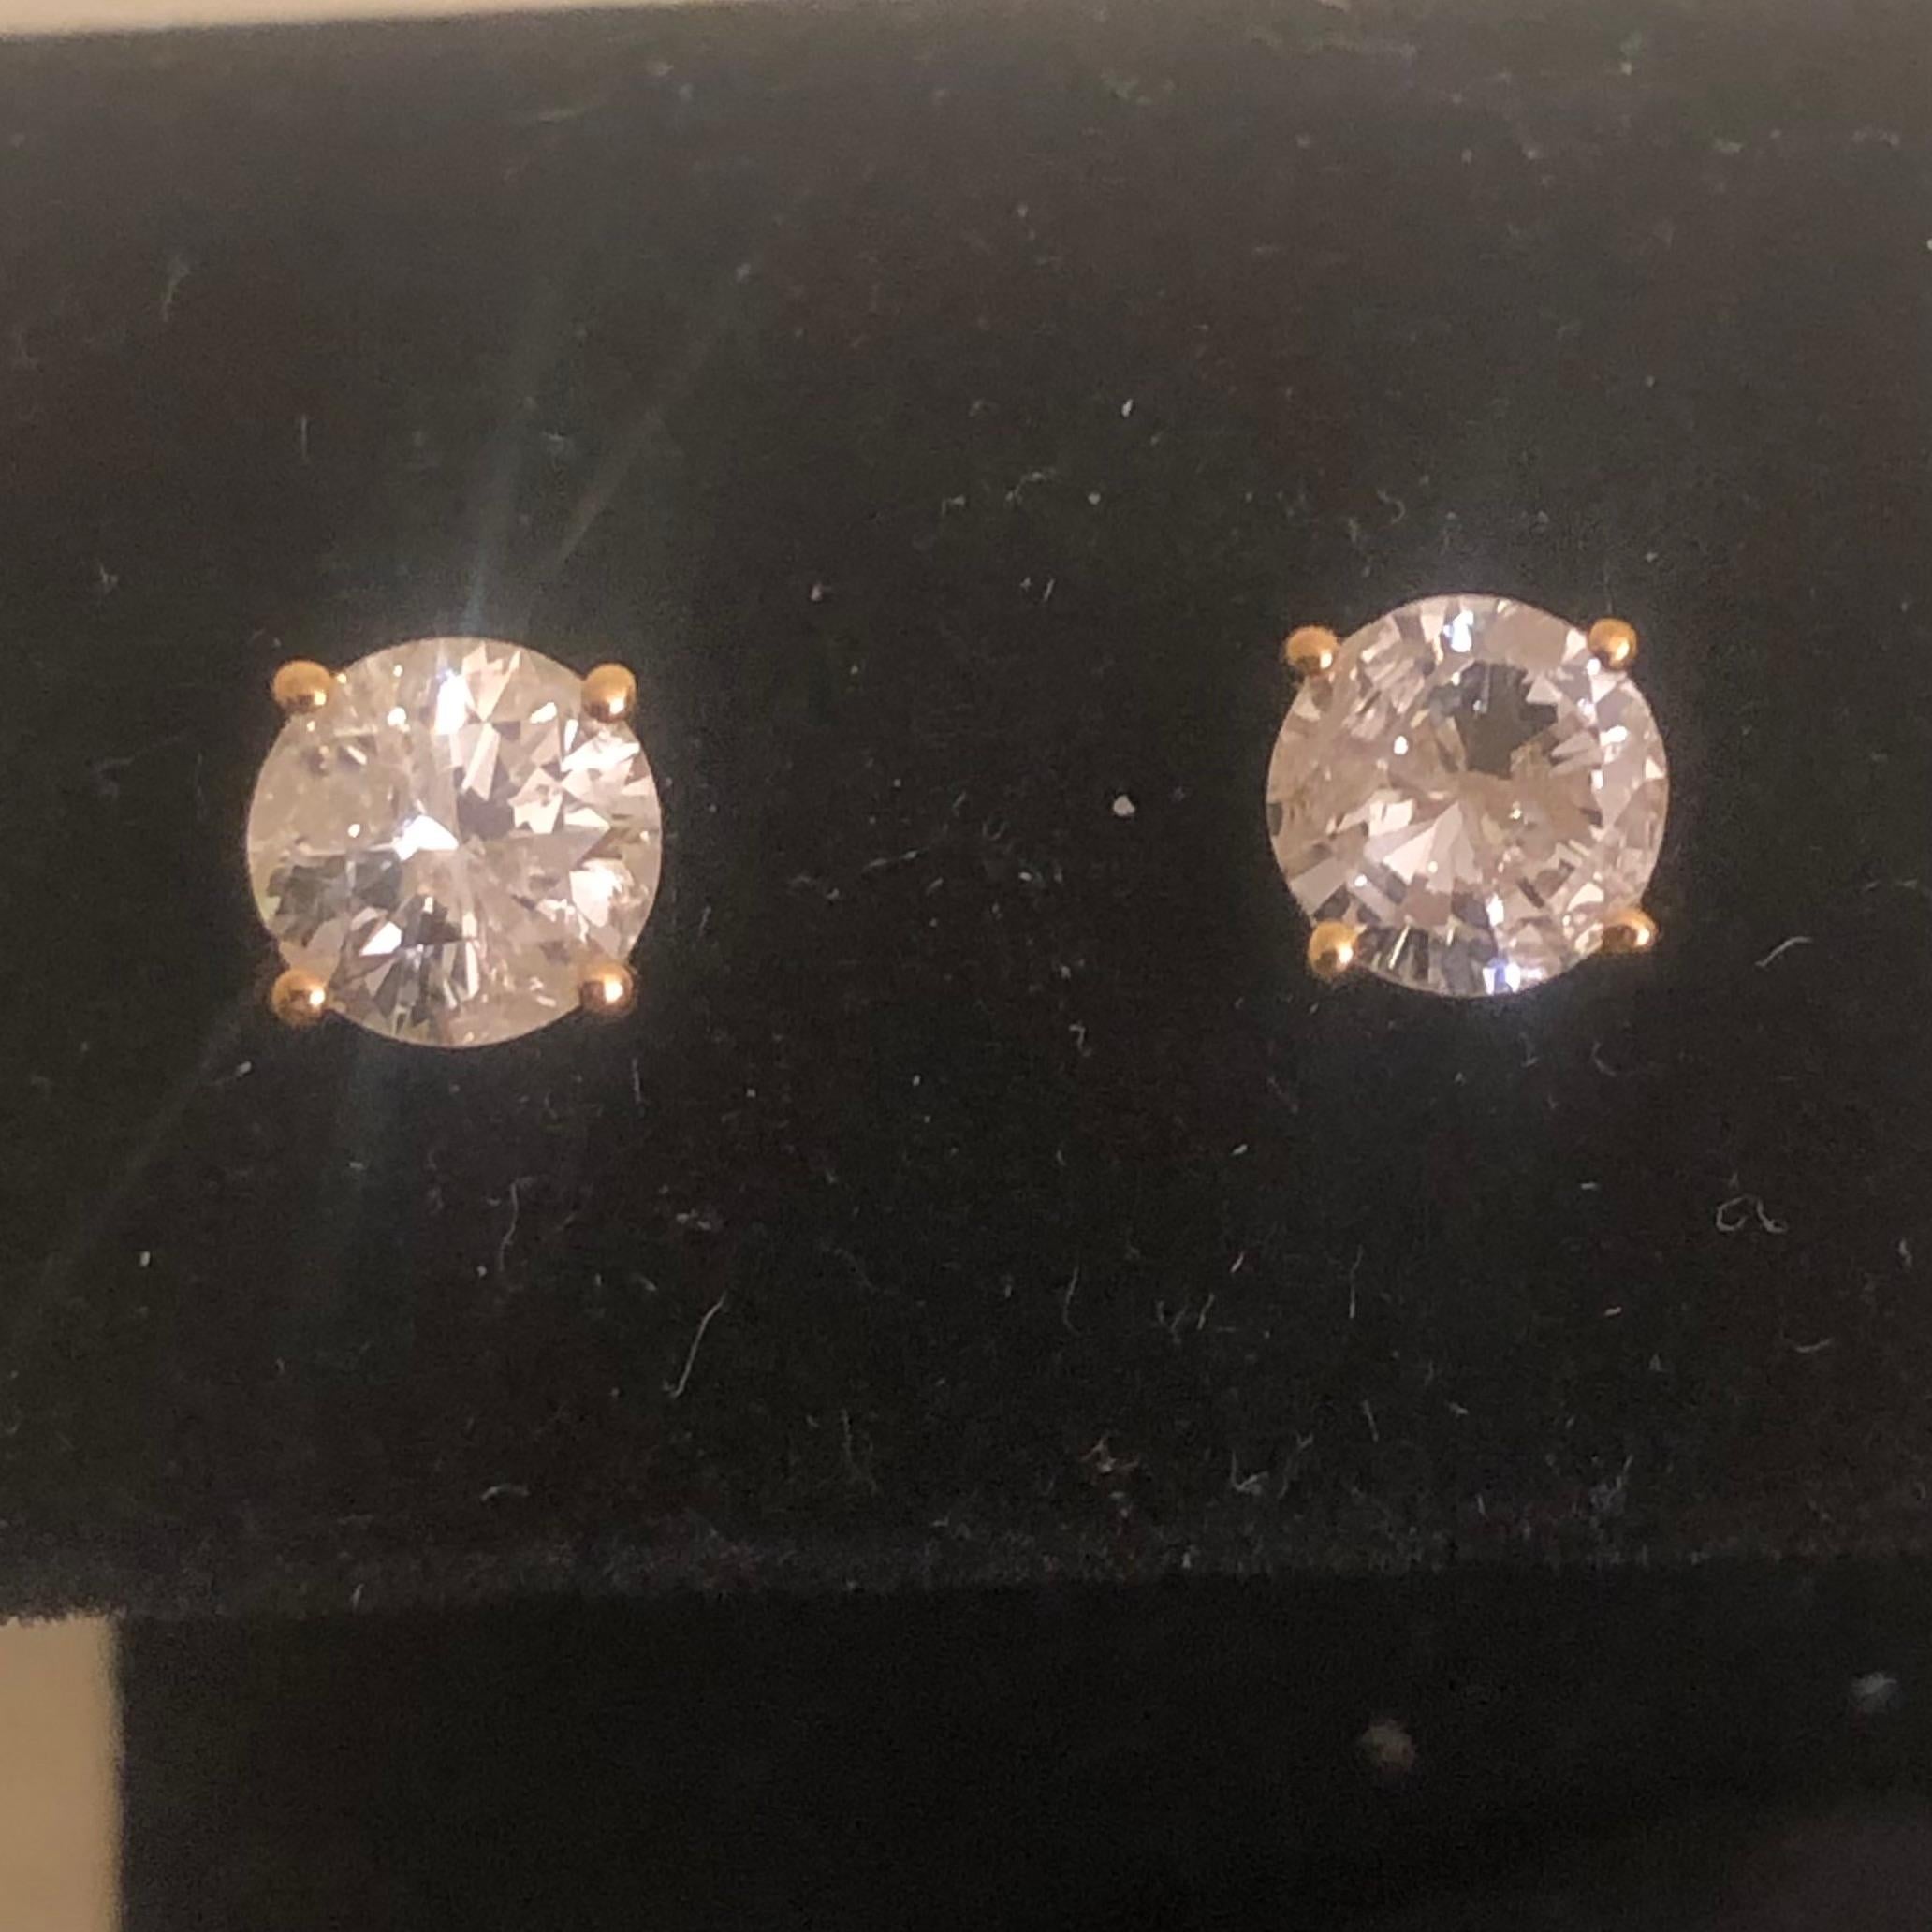 Stunning 1 1/2 Ct Round Solitaire Diamond Stud Earrings in 14K Yellow Gold. These natural diamond solitaire studs are certified with an appraisal report value of $4,470.00.

A large center solitaire diamond (size of an engagement ring) is set on